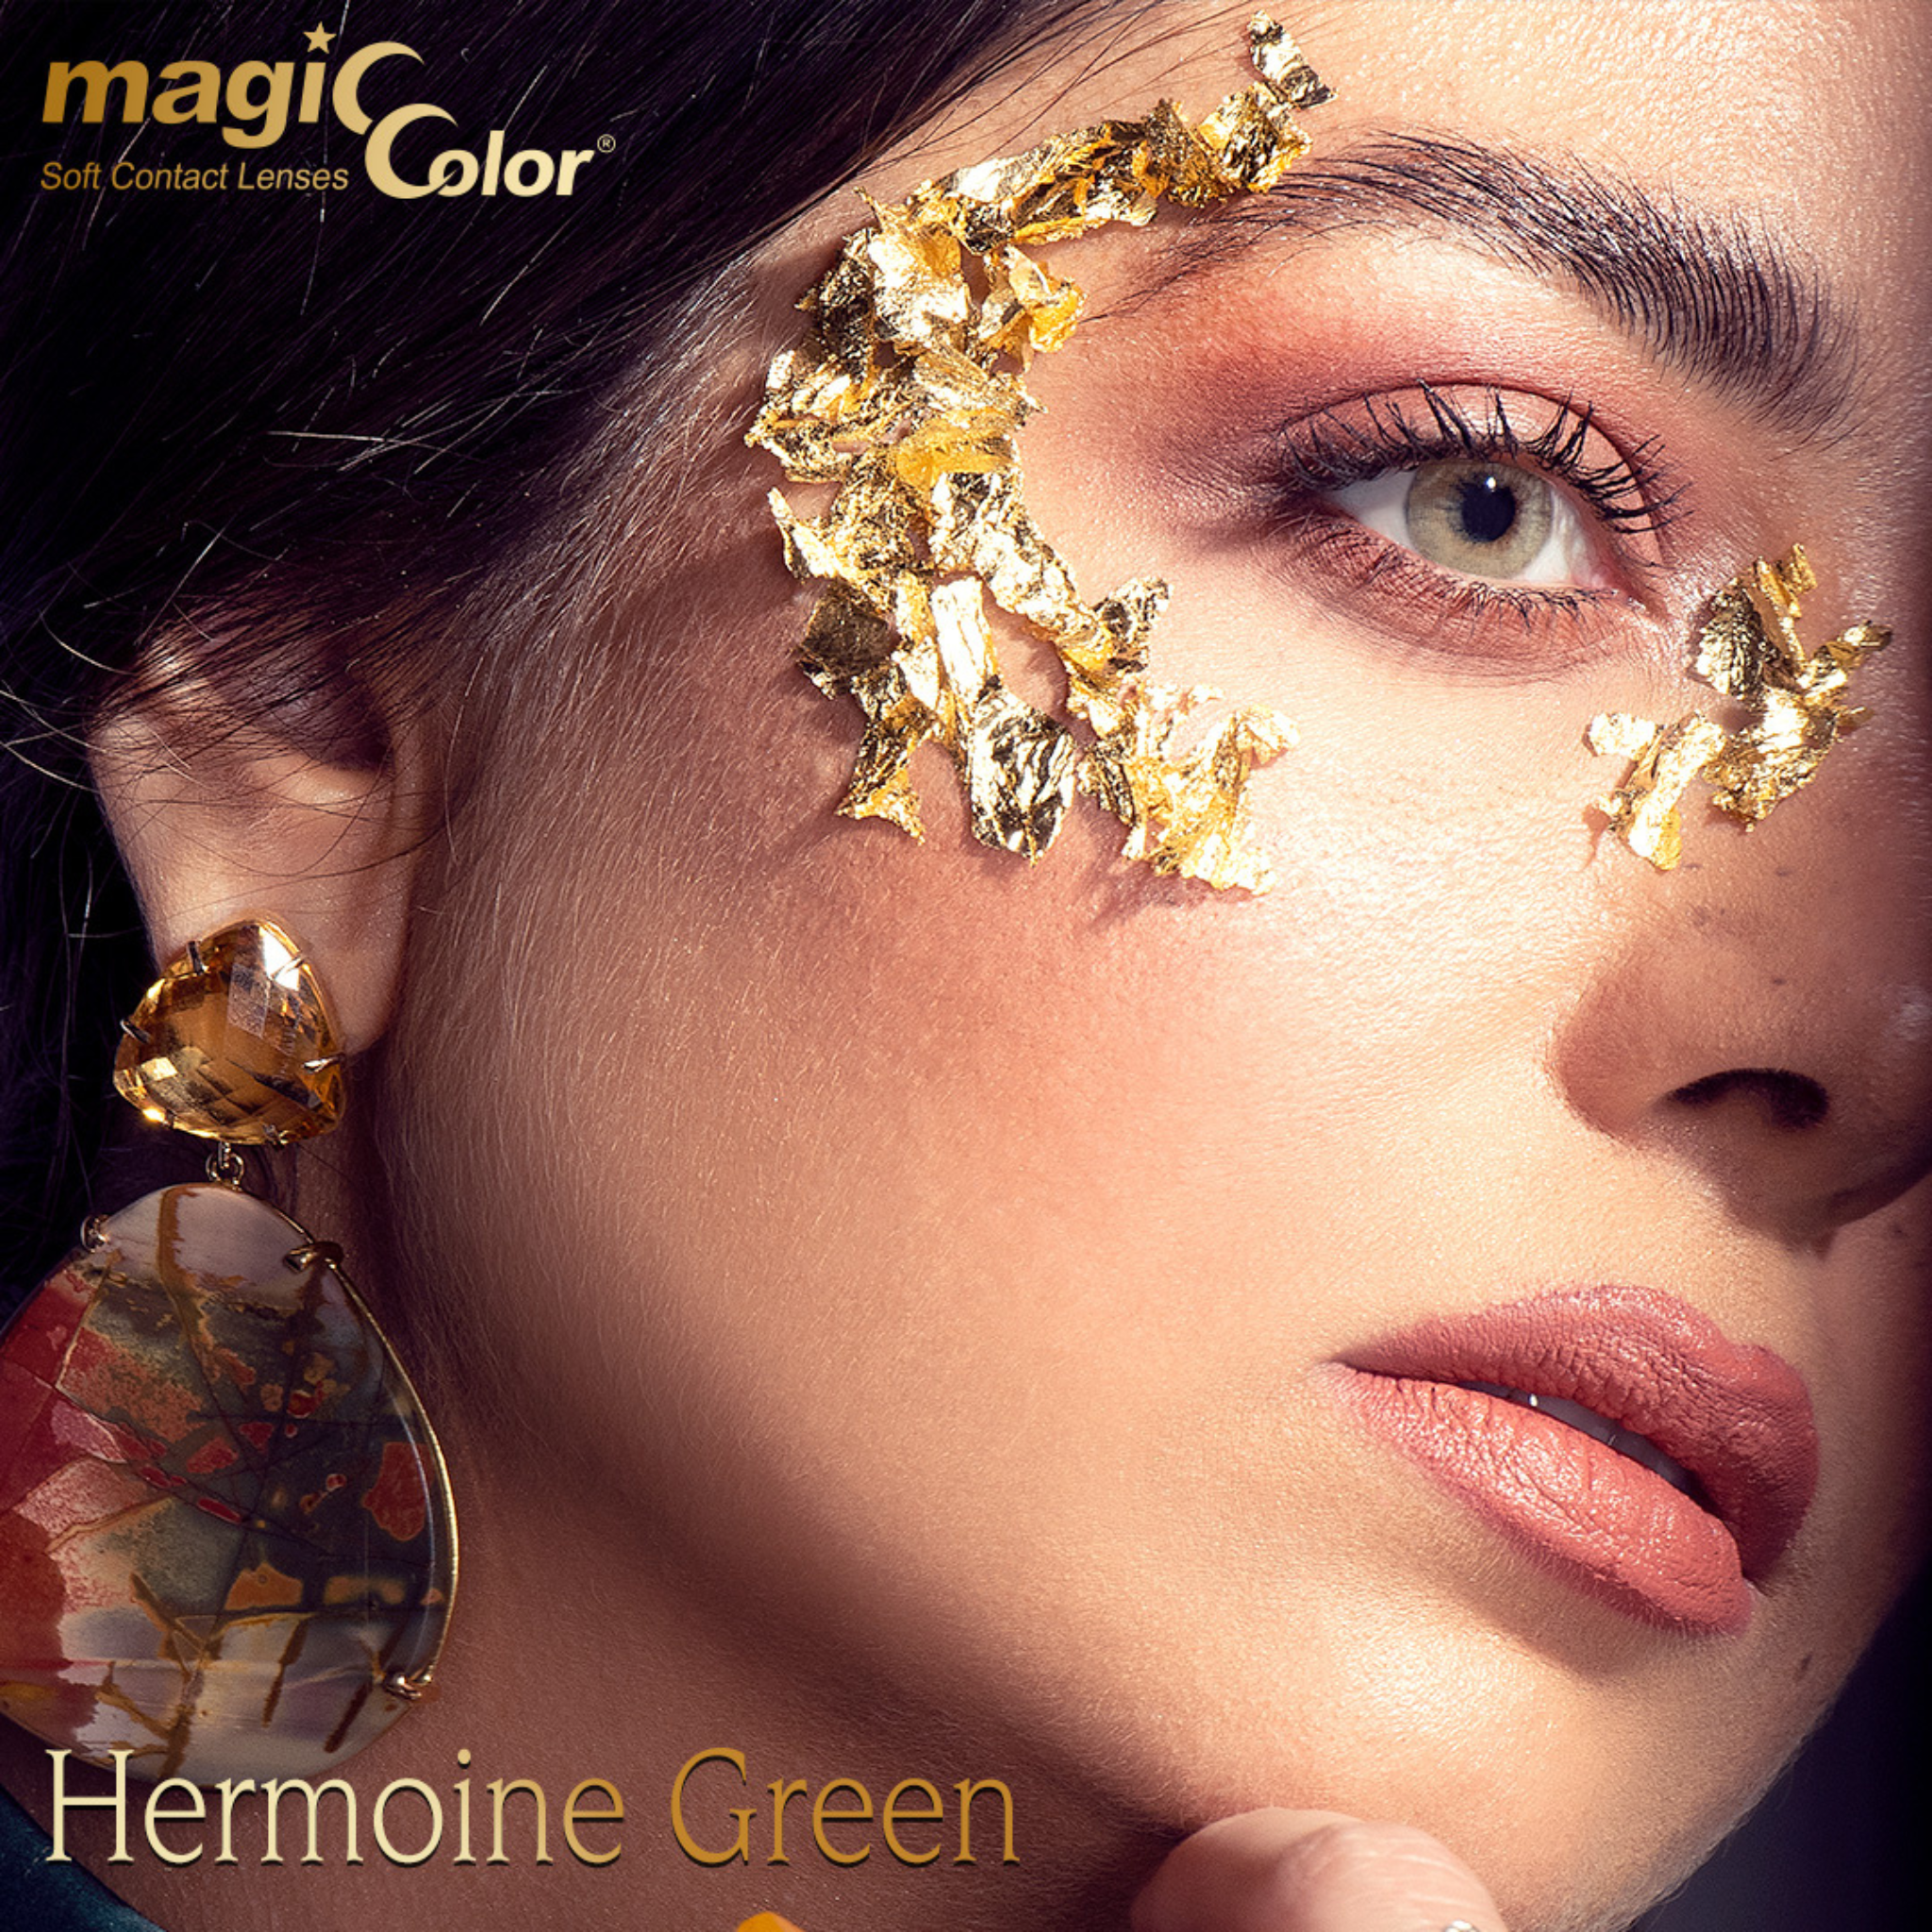 Magic Color: Hermoine green - Monthly